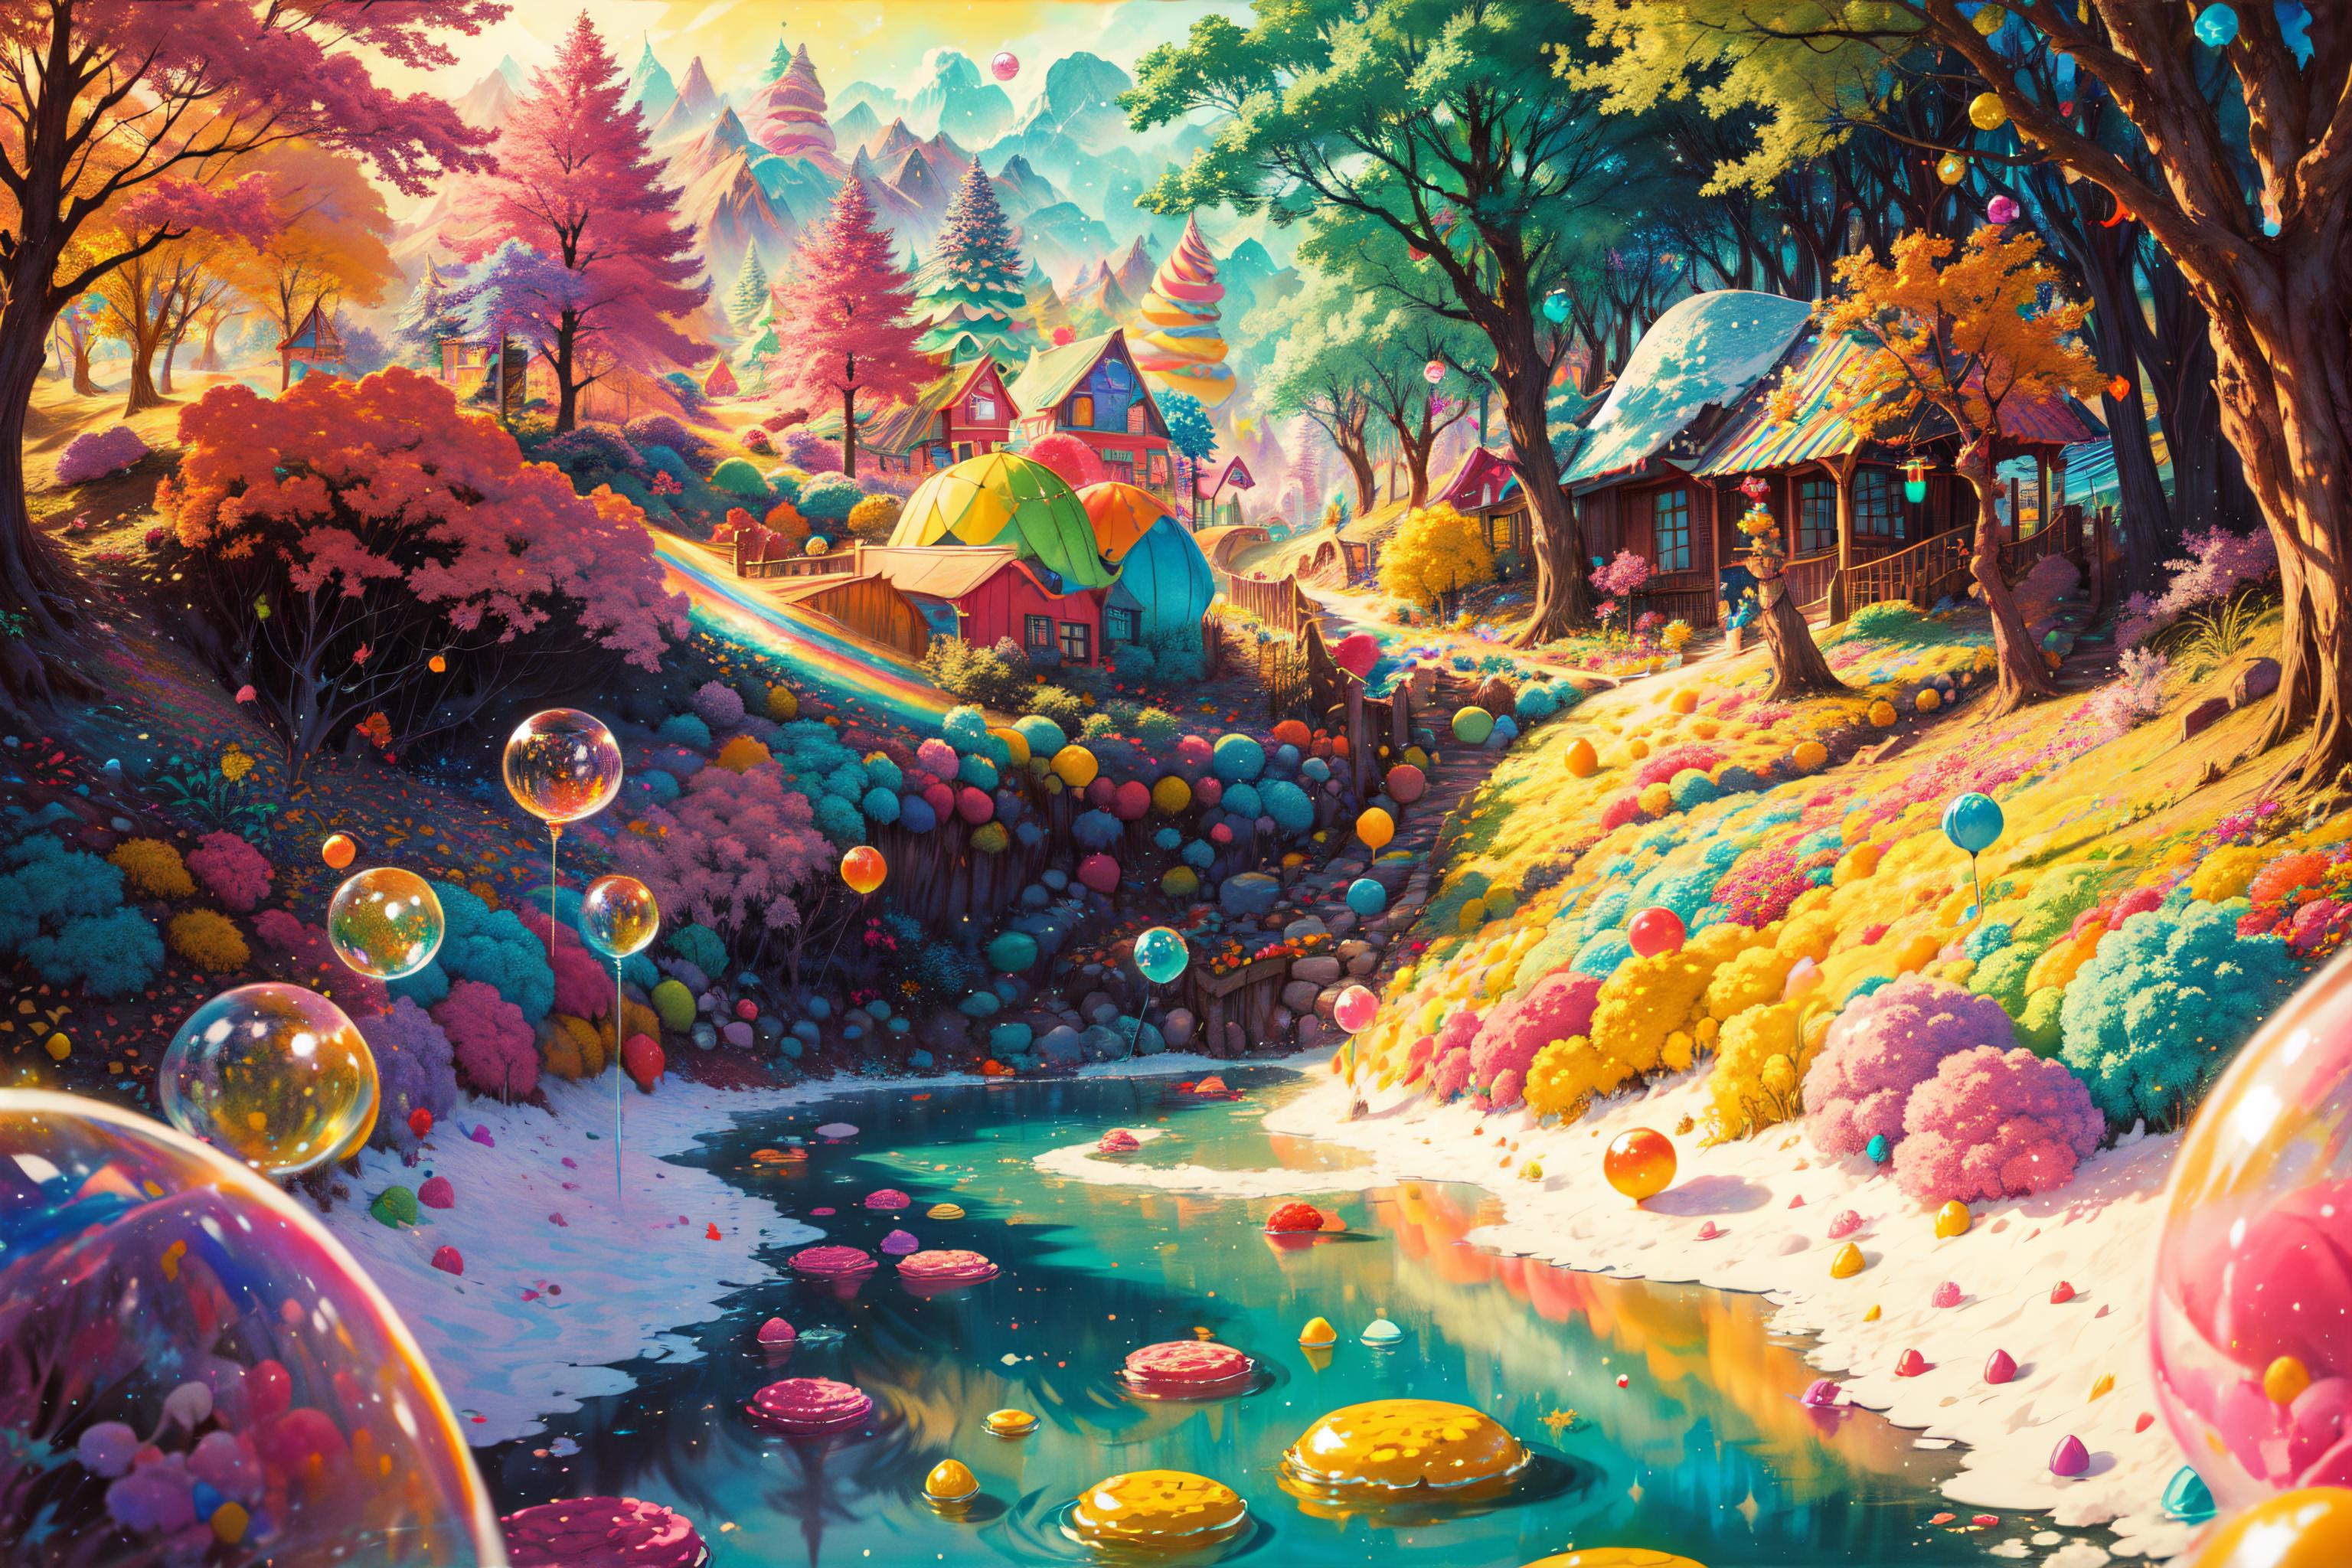 CANDYLAND image by RIXYN